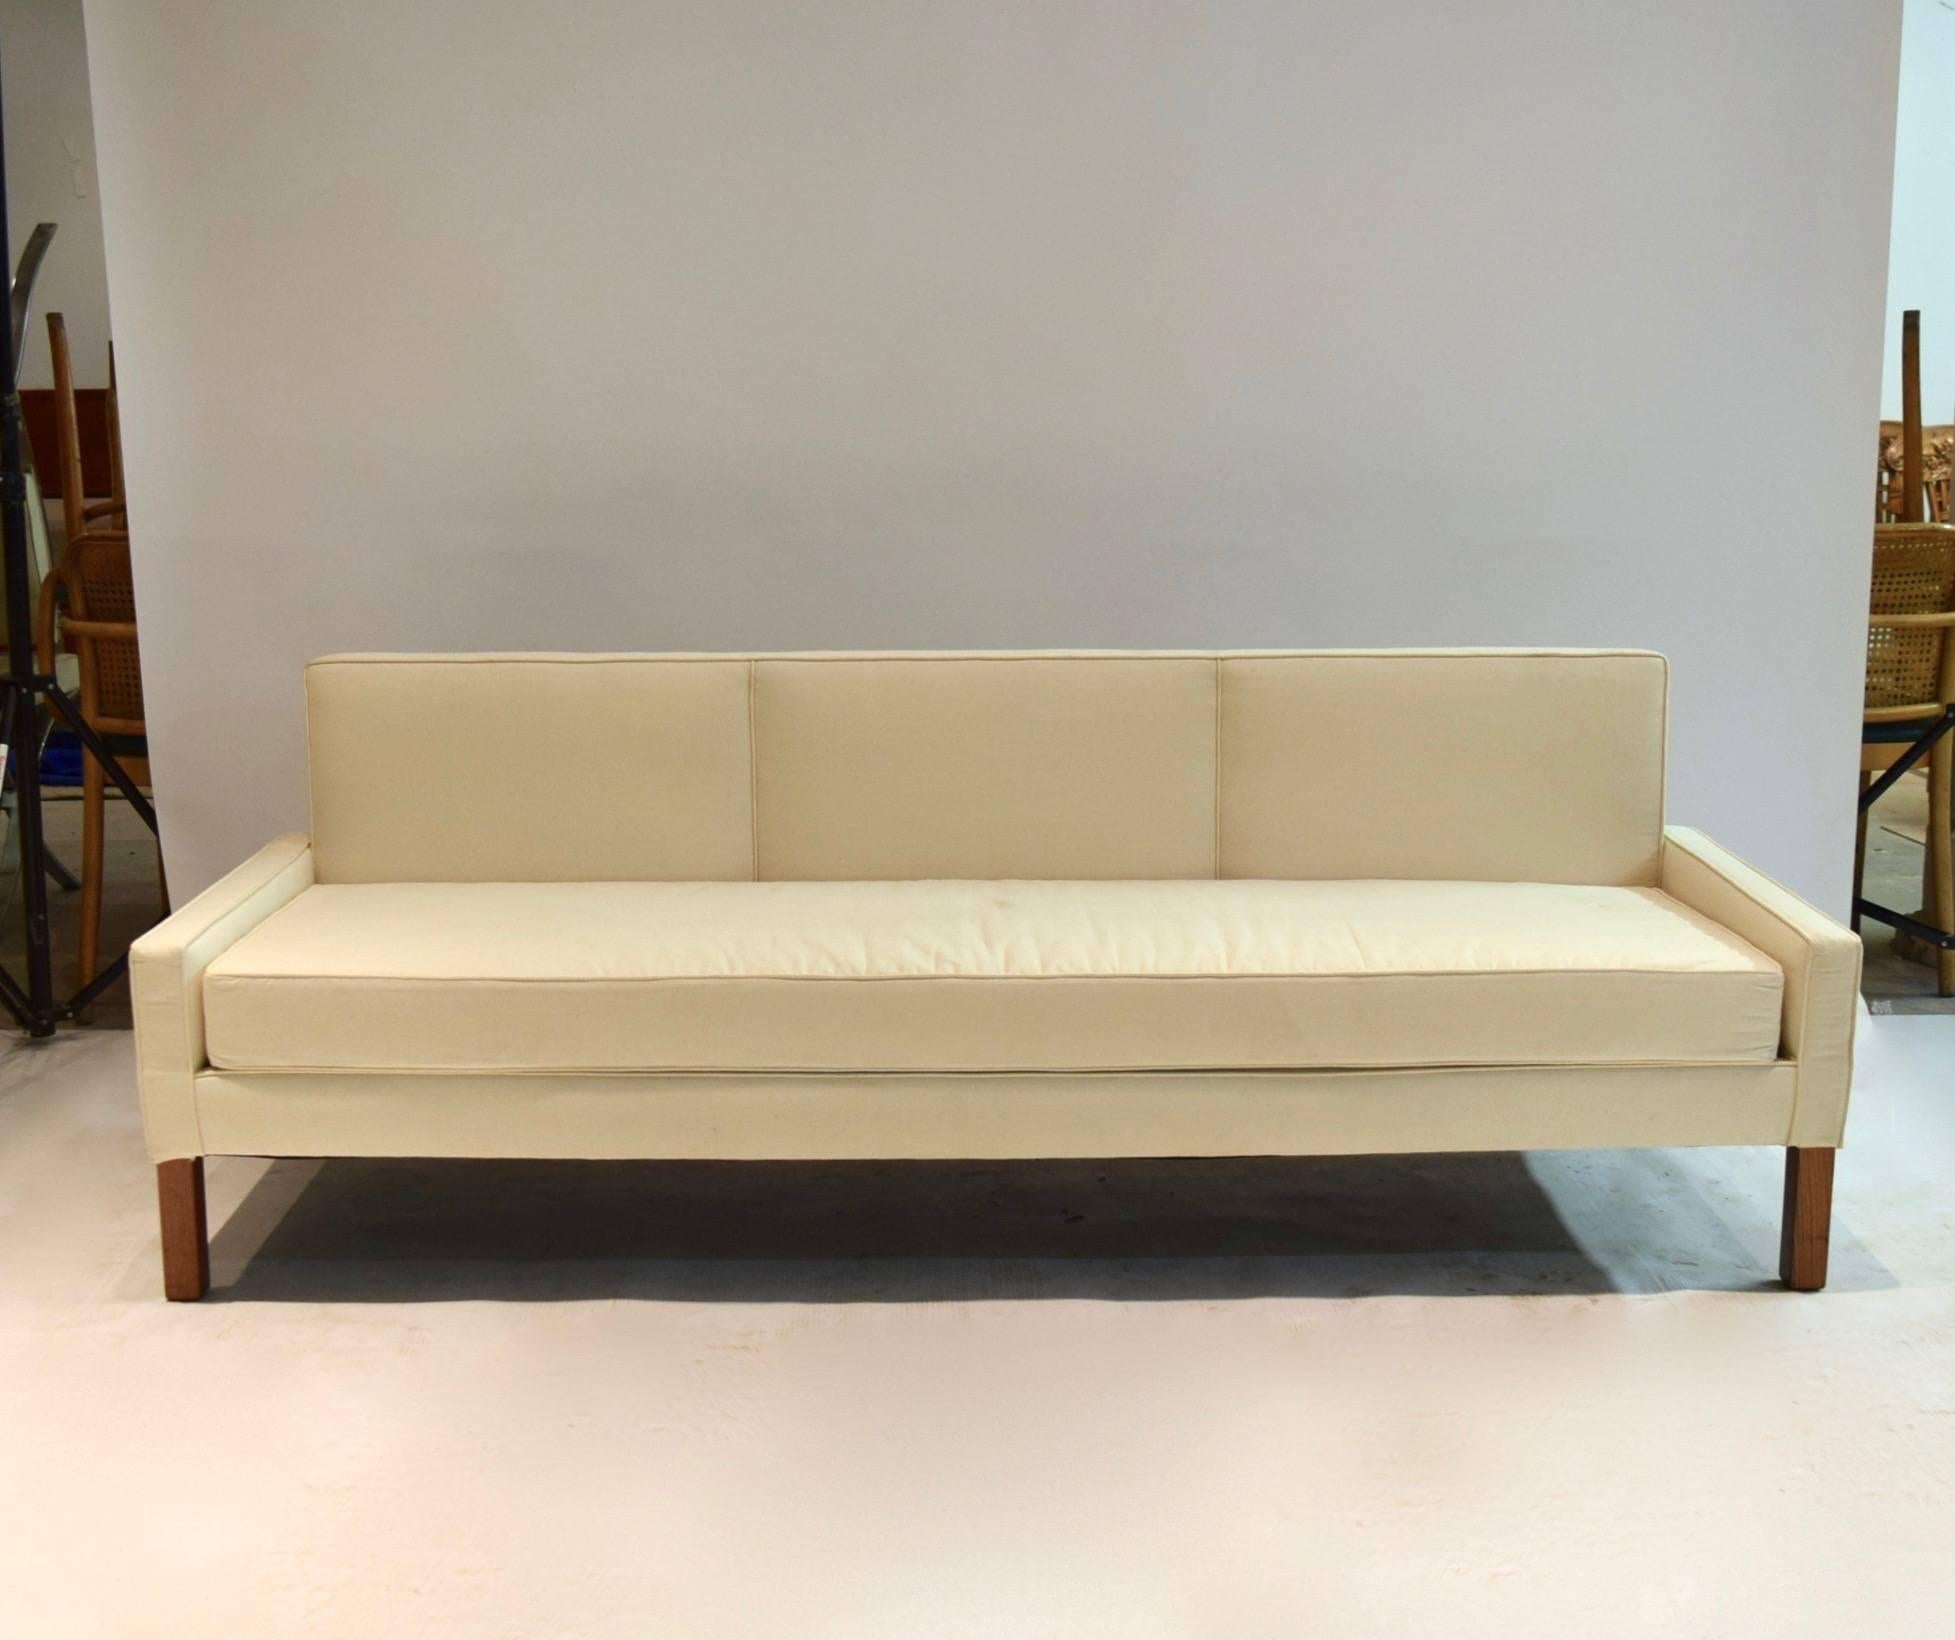 Early three-seat Widdicomb sofa in excellent condition, recently reupholstered in muslin and supported on four restored wooden legs.
Arm height: 17 inches.